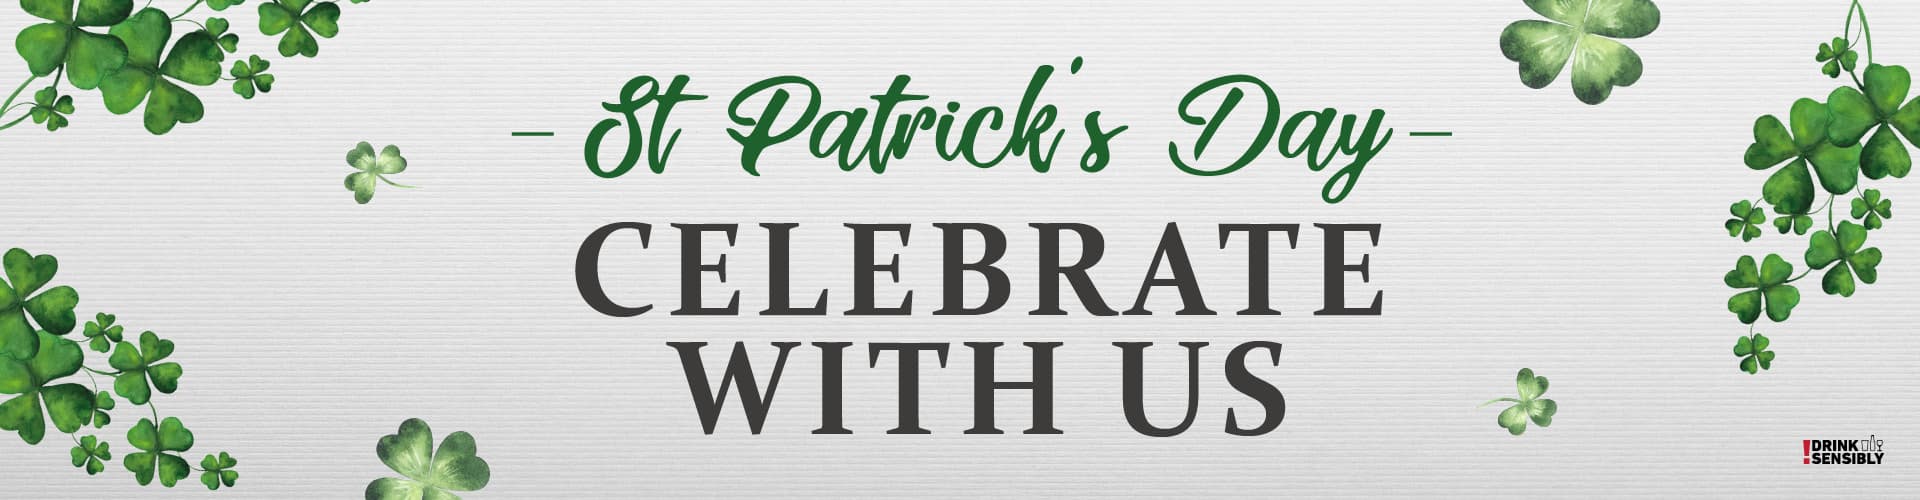 Celebrate St Patrick's Day in Woodford Green